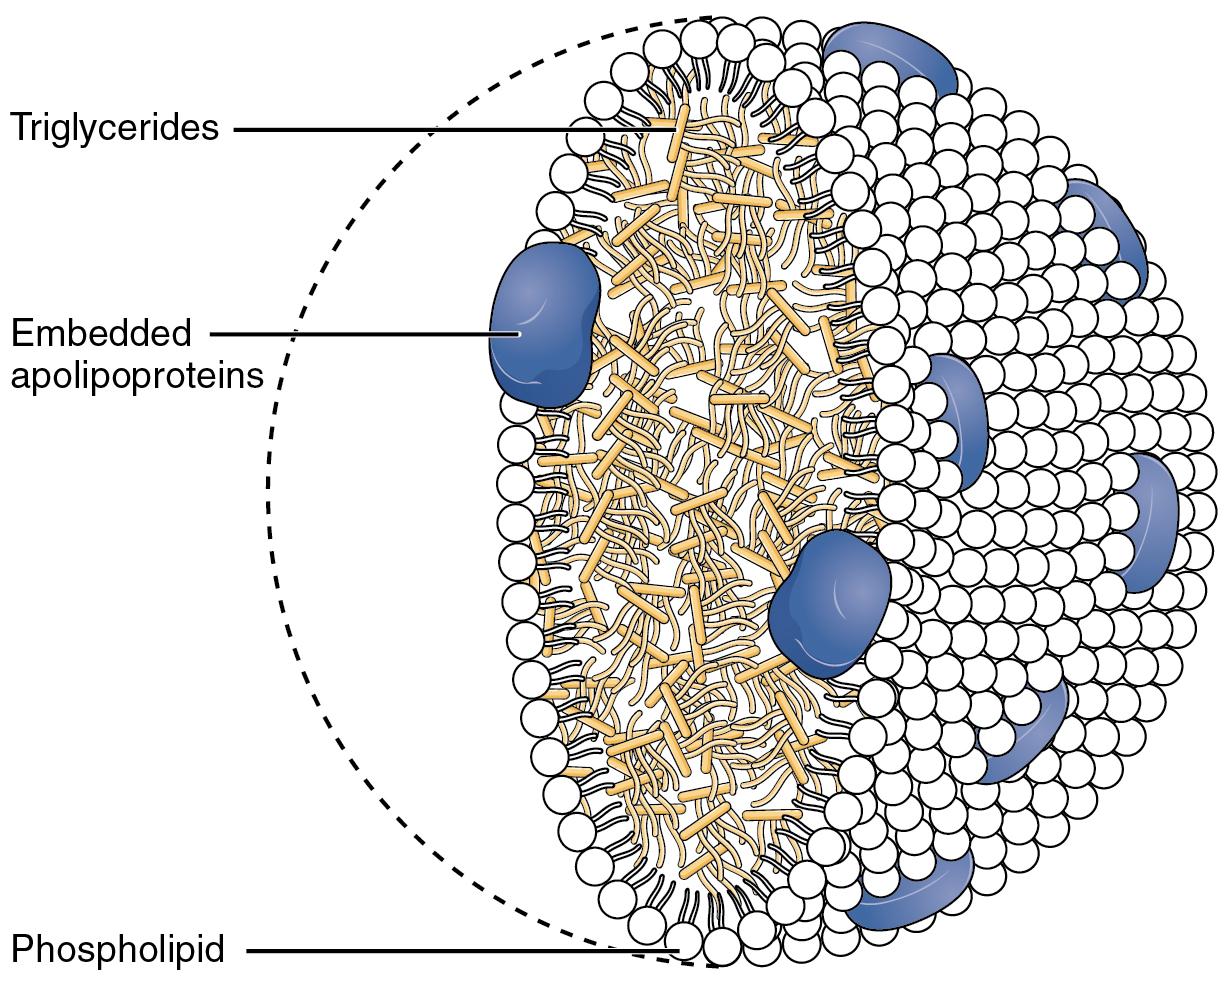 Cartoon diagram showing the structure of a chylomicron. The interior is stuffed with triglycerides, shown in light yellow. The exterior is made up of phospholipids, shown in white and oriented with their fatty tails towards the inside of the chylomicron, and dotted with embedded apolipoproteins, shown in blue.